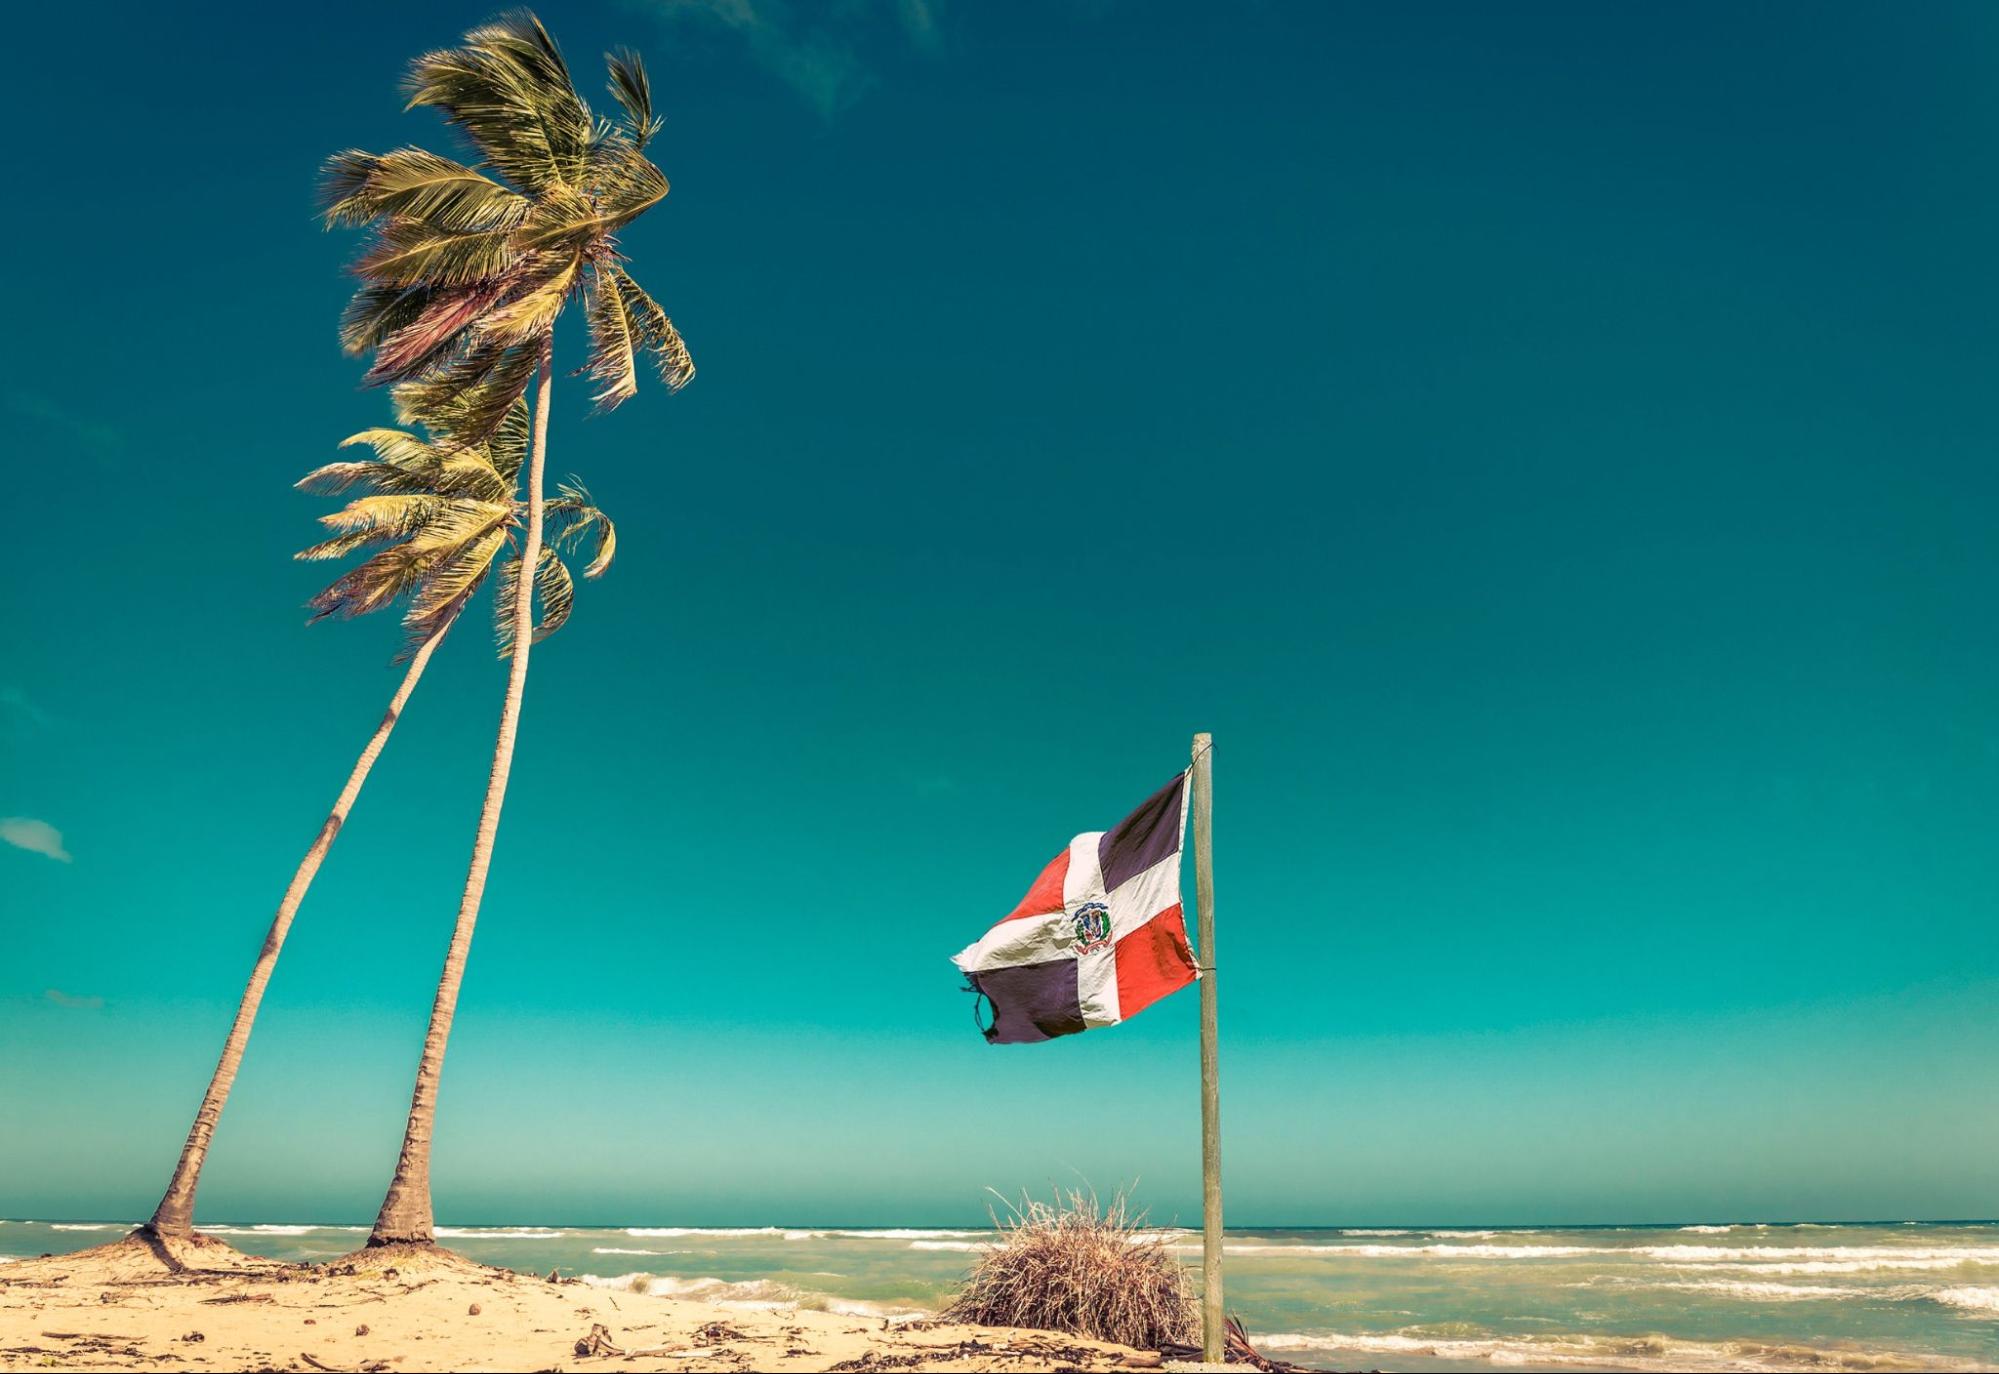 Sandy beach, palm tree and Dominican Republic flag